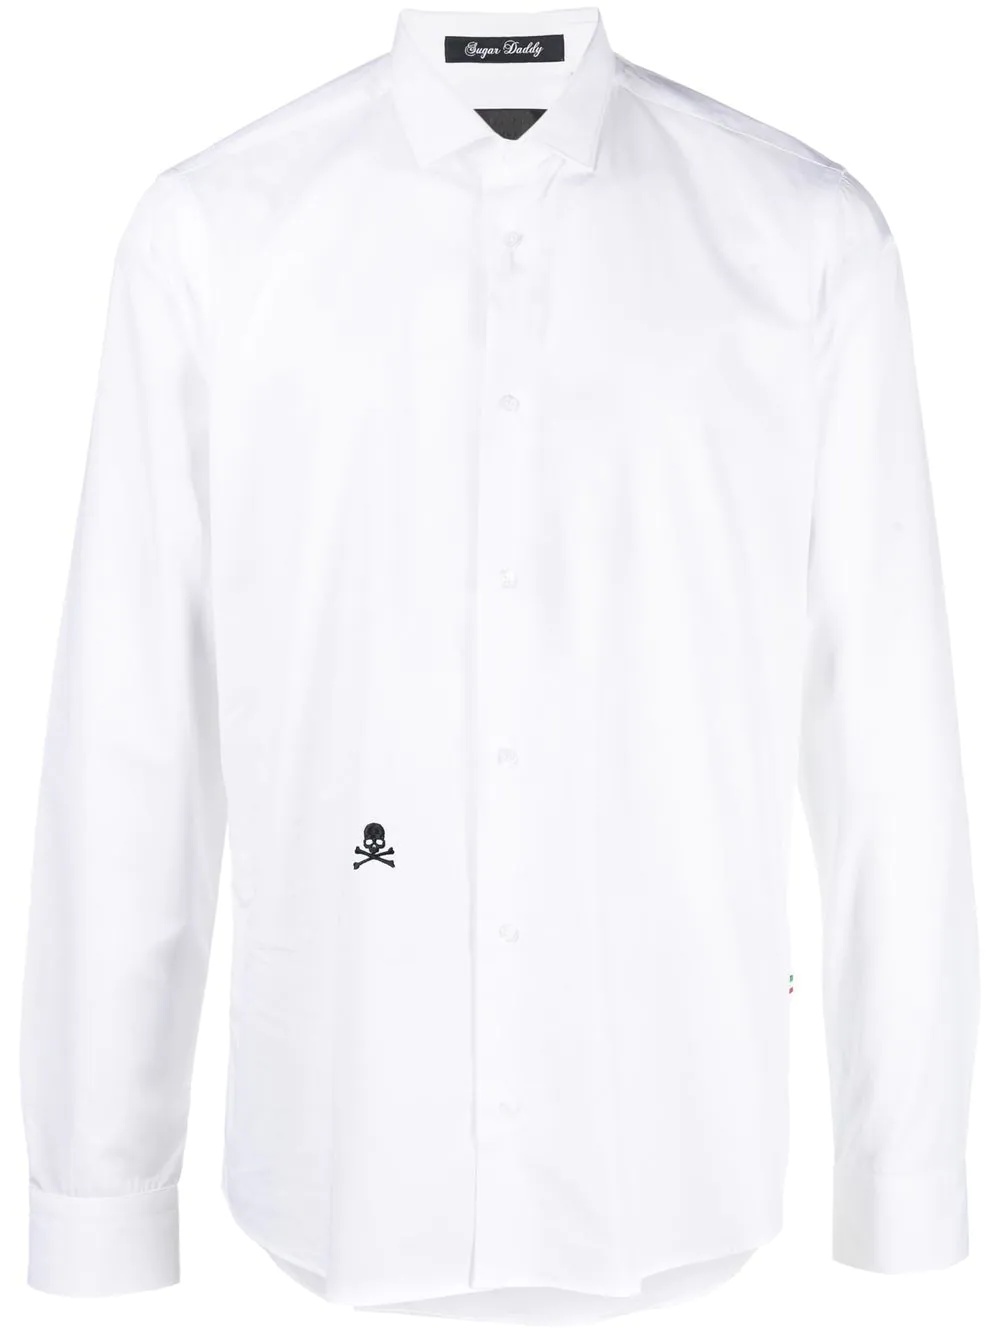 embroidered skull cotton shirt - 1